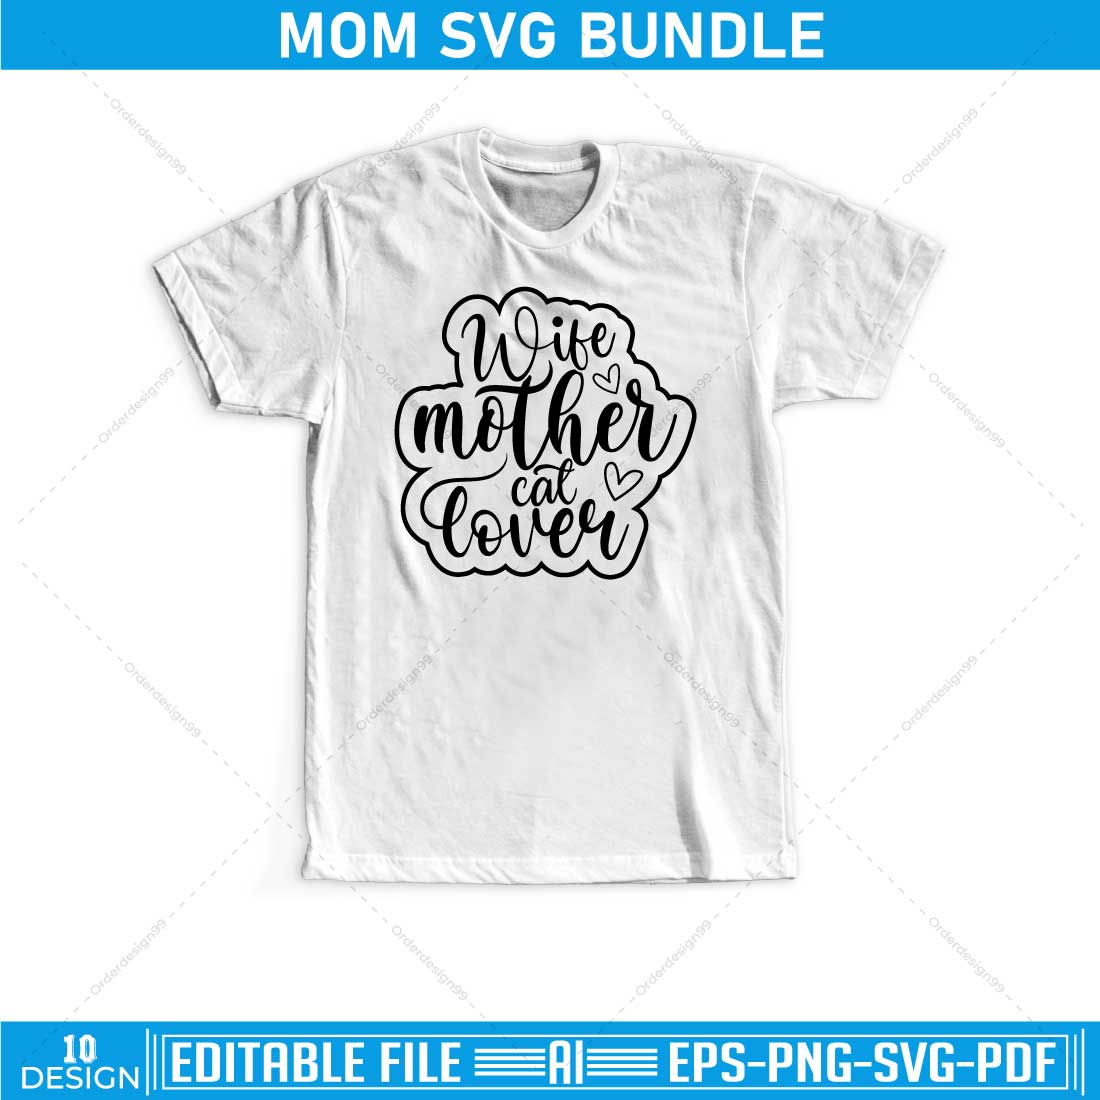 T - shirt with the words mom svg bundle.